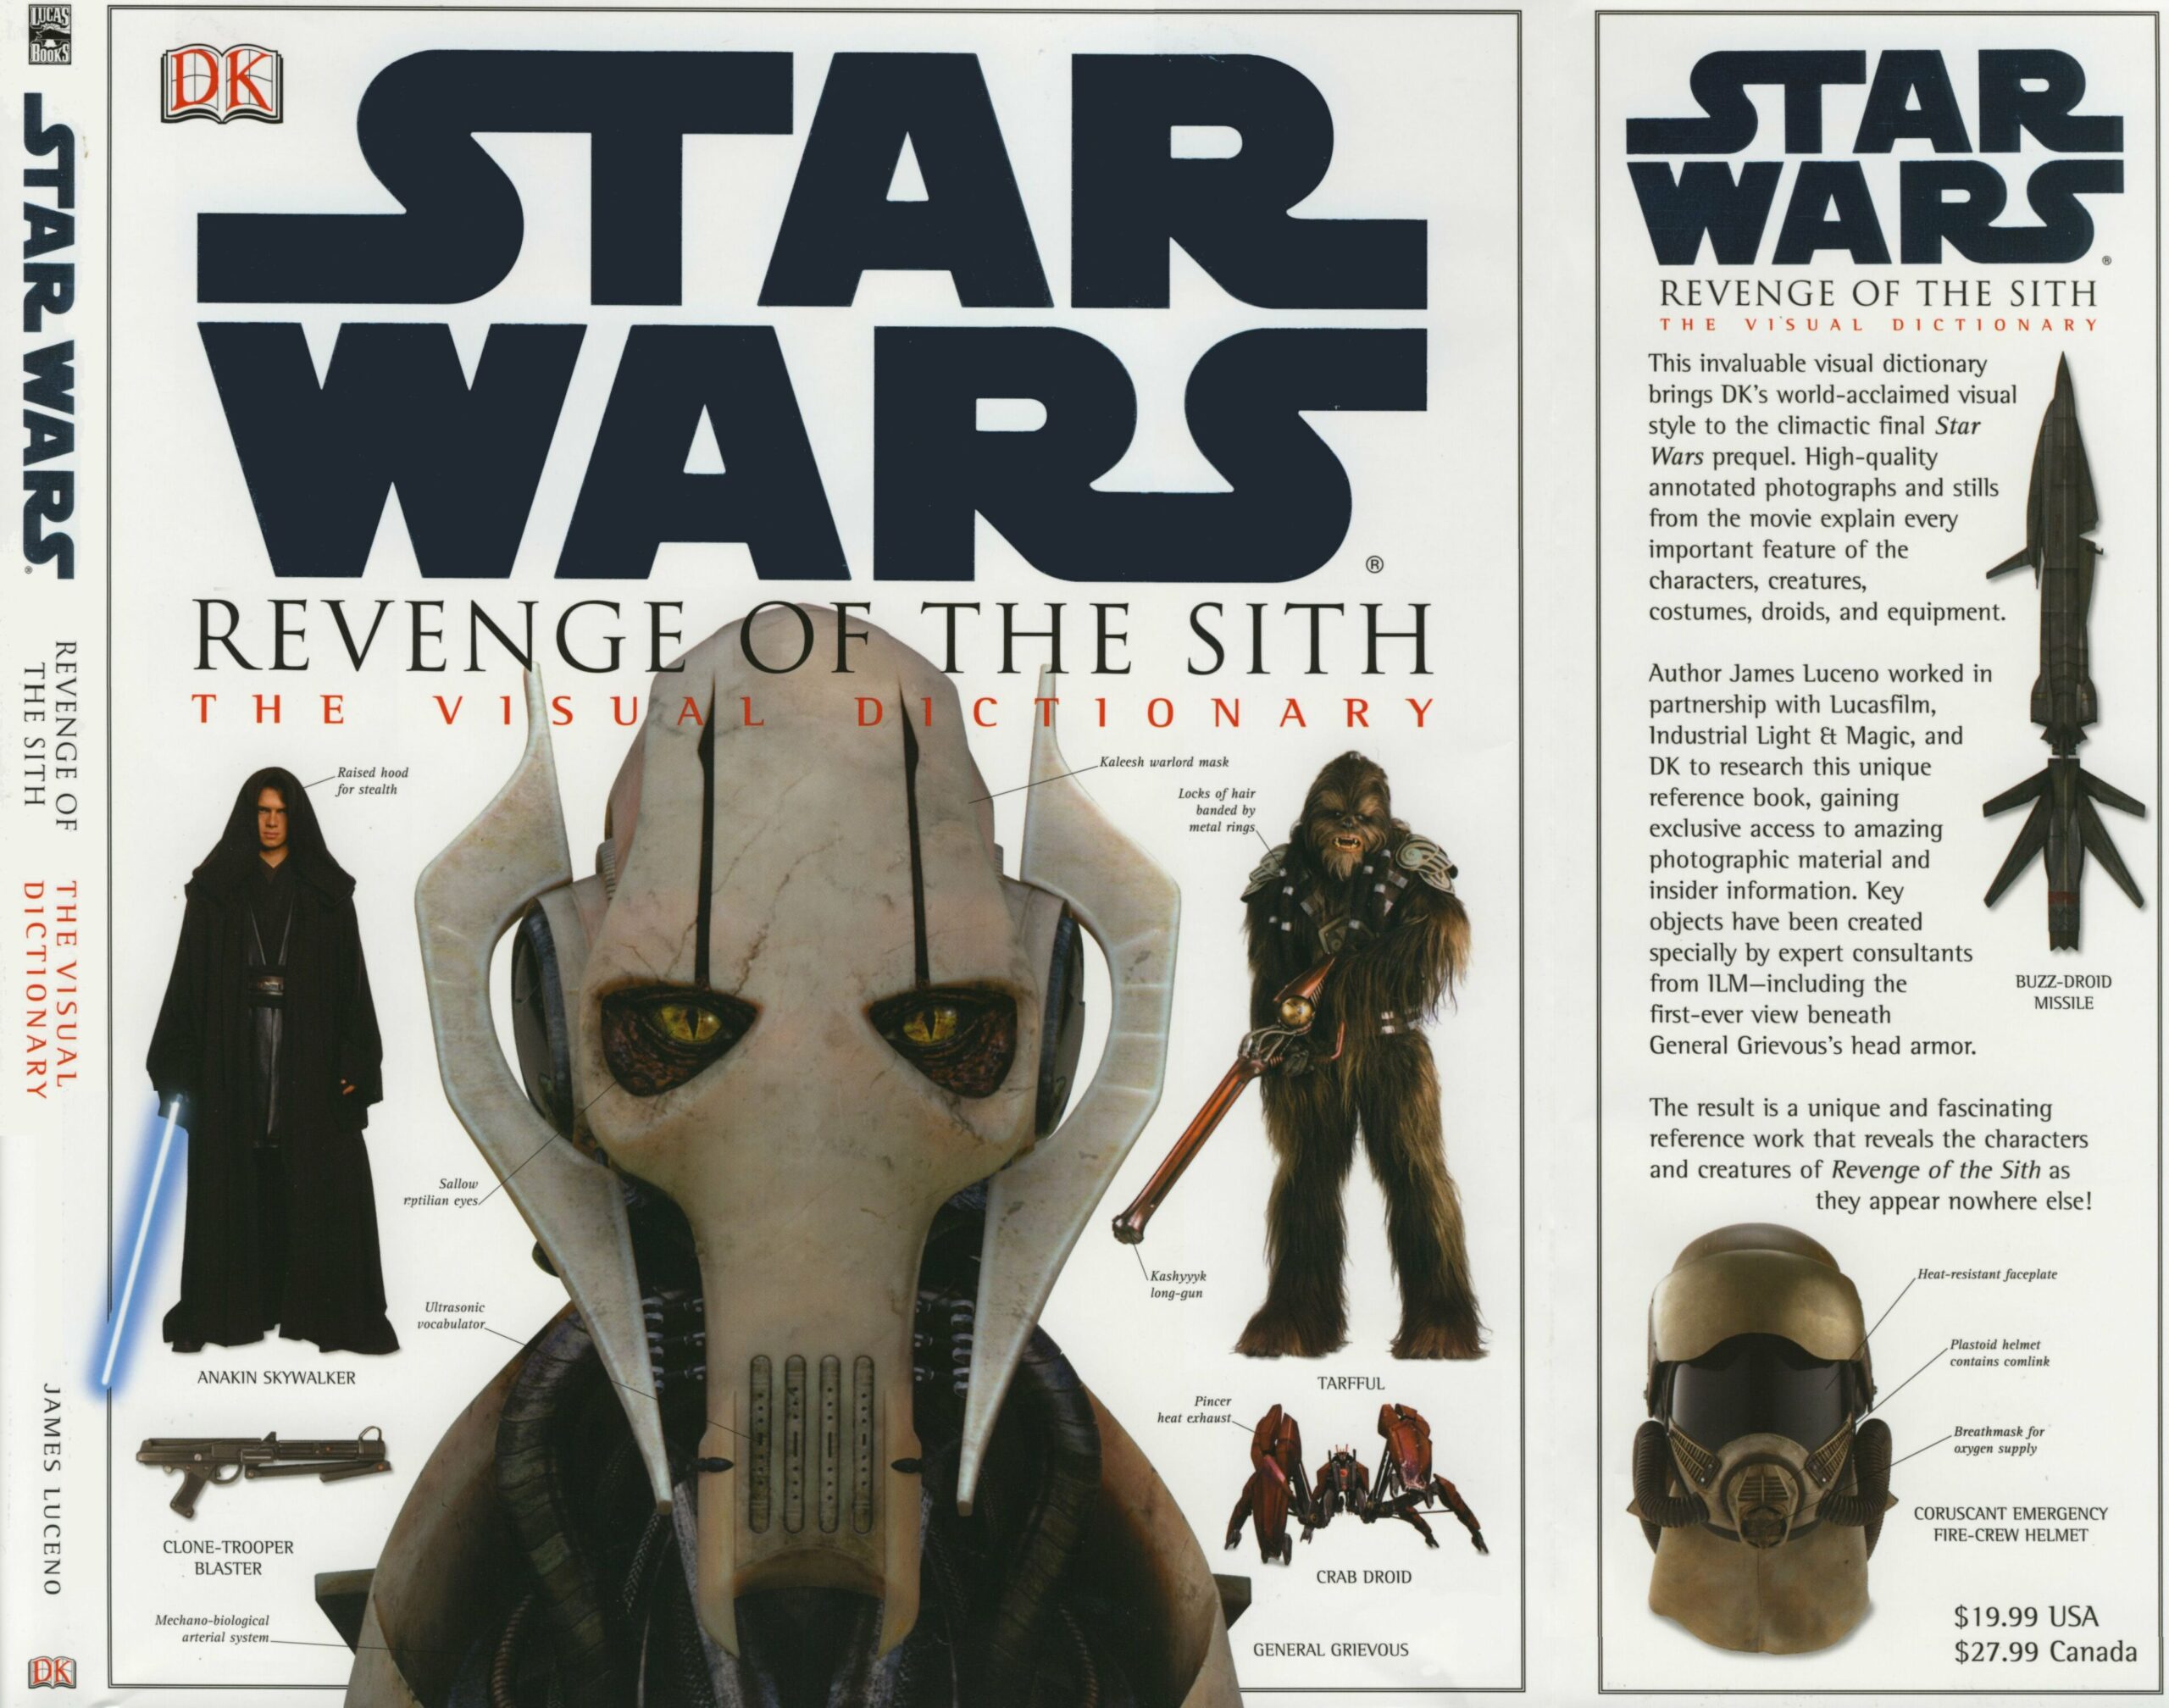 Star Wars: Revenge of the Sith: The Visual Dictionary